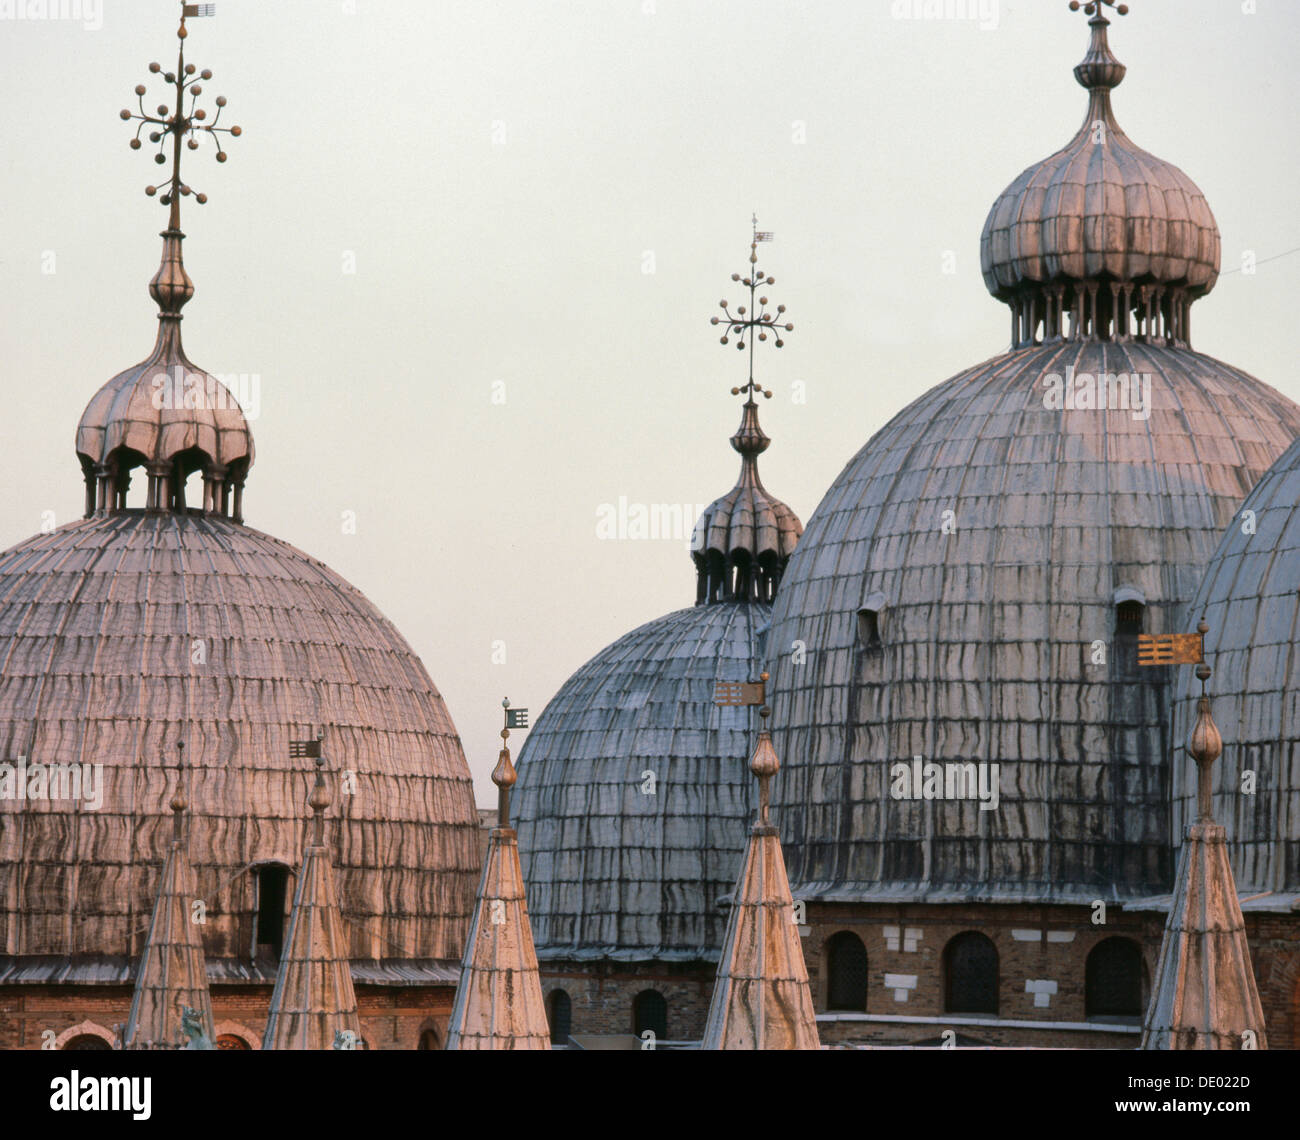 Domes of St Mark's Basilica, Venice, Italy. Artist: Werner Forman Stock Photo